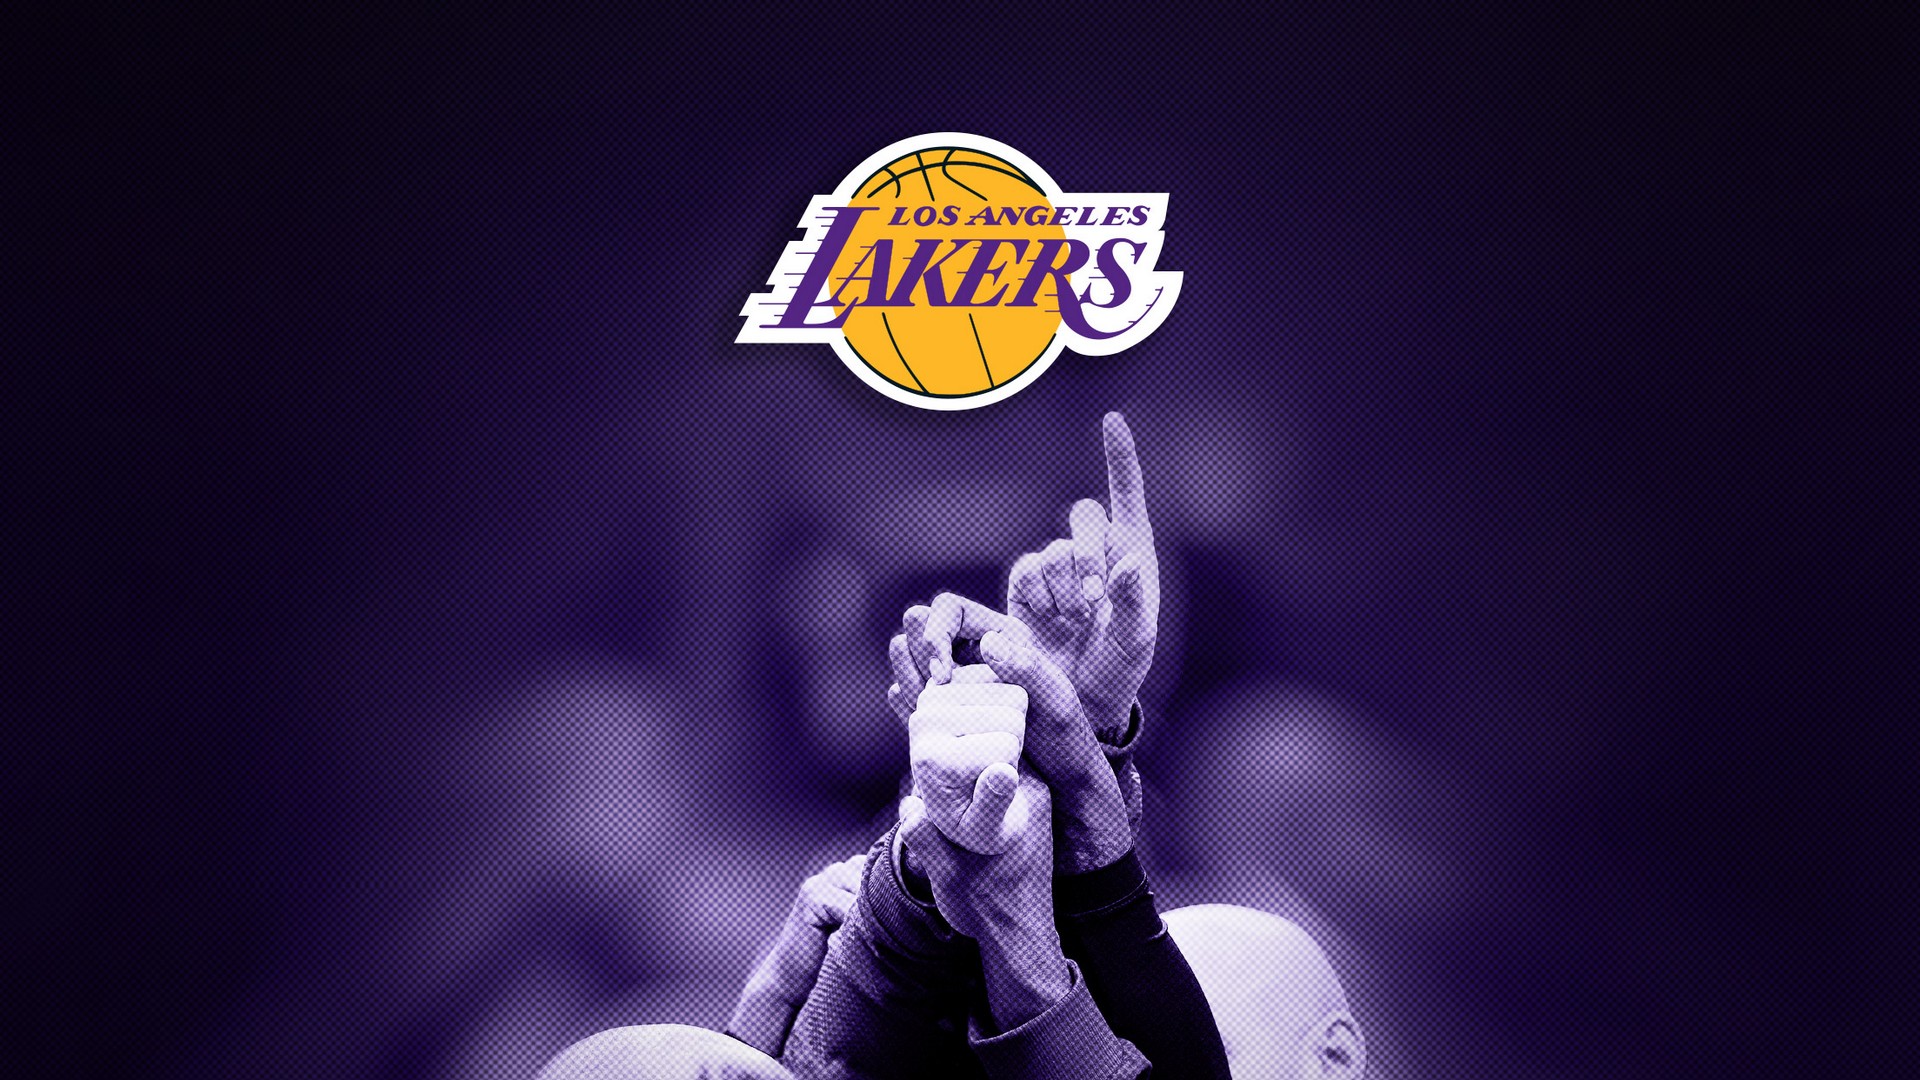 Los Angeles Lakers For Desktop Wallpaper with image dimensions 1920x1080 pixel. You can make this wallpaper for your Desktop Computer Backgrounds, Windows or Mac Screensavers, iPhone Lock screen, Tablet or Android and another Mobile Phone device